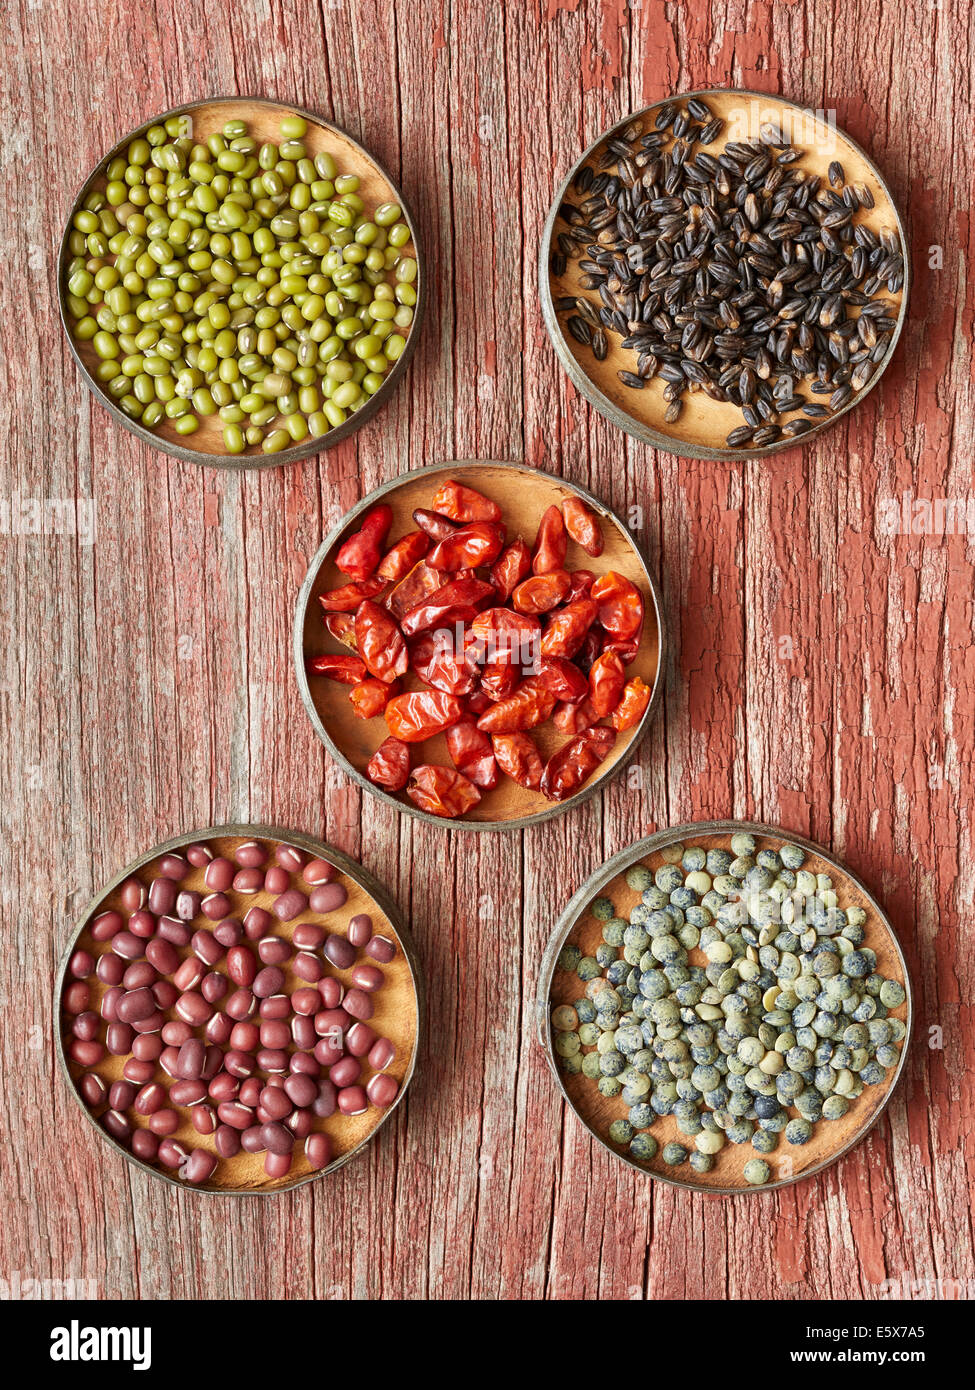 Five dishes containing dried food: Mung Beans, Black Barley, Pequin Chiles, Adzuki Beans, French Green Lentils Stock Photo